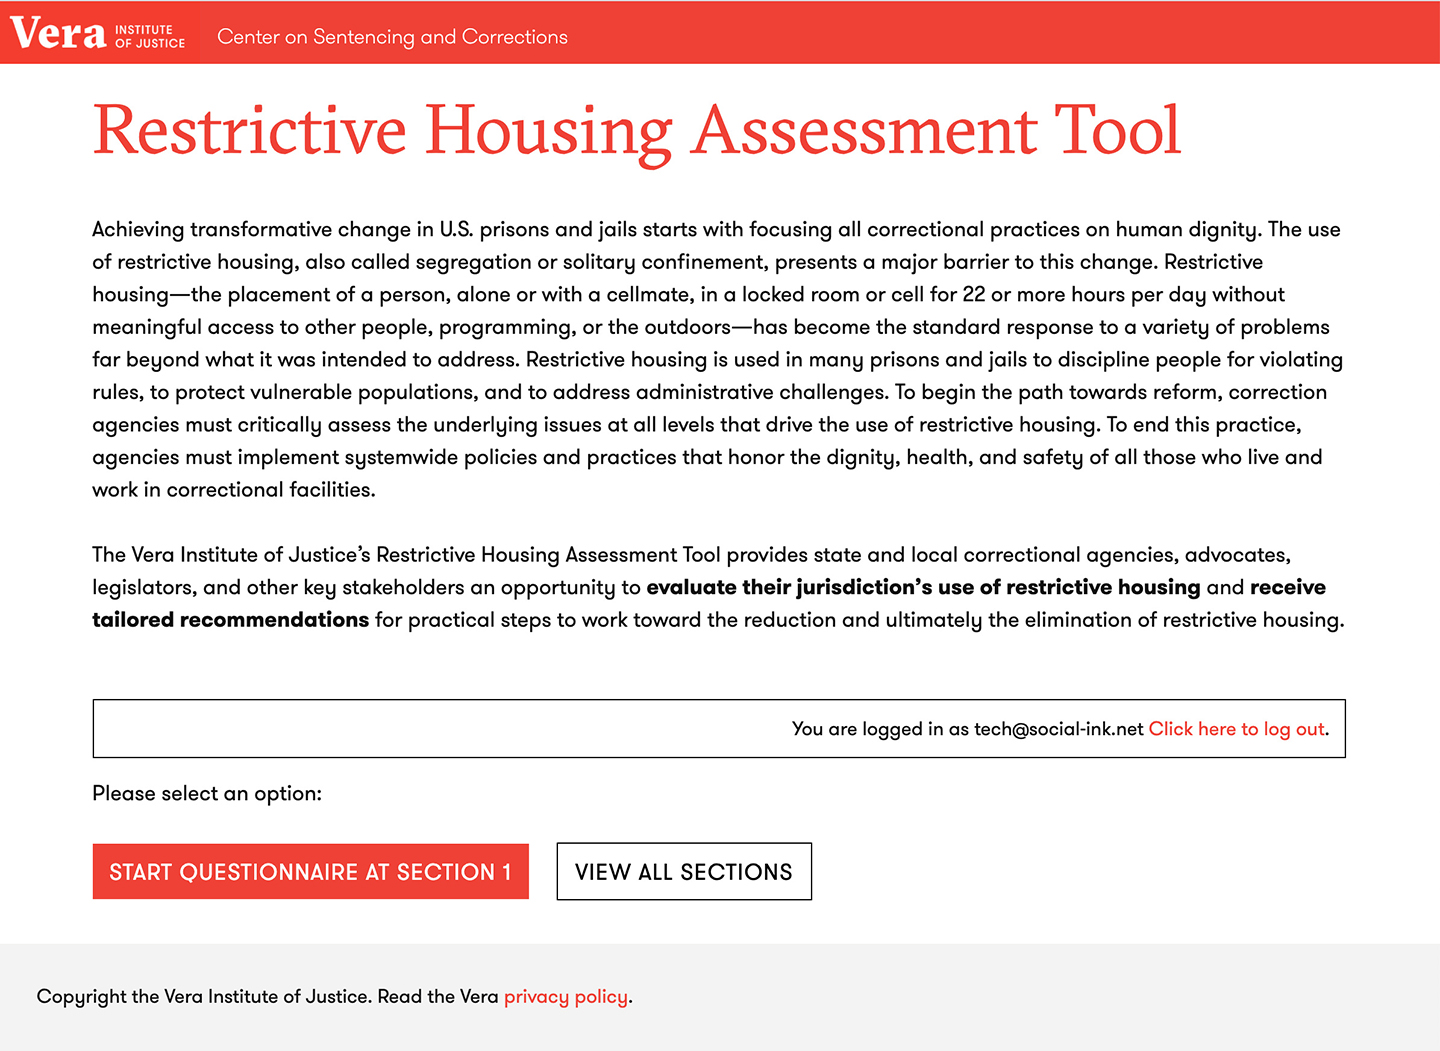 New Web Application launched for the Vera Institute of Justice: The Restrictive Housing Assessment Tool